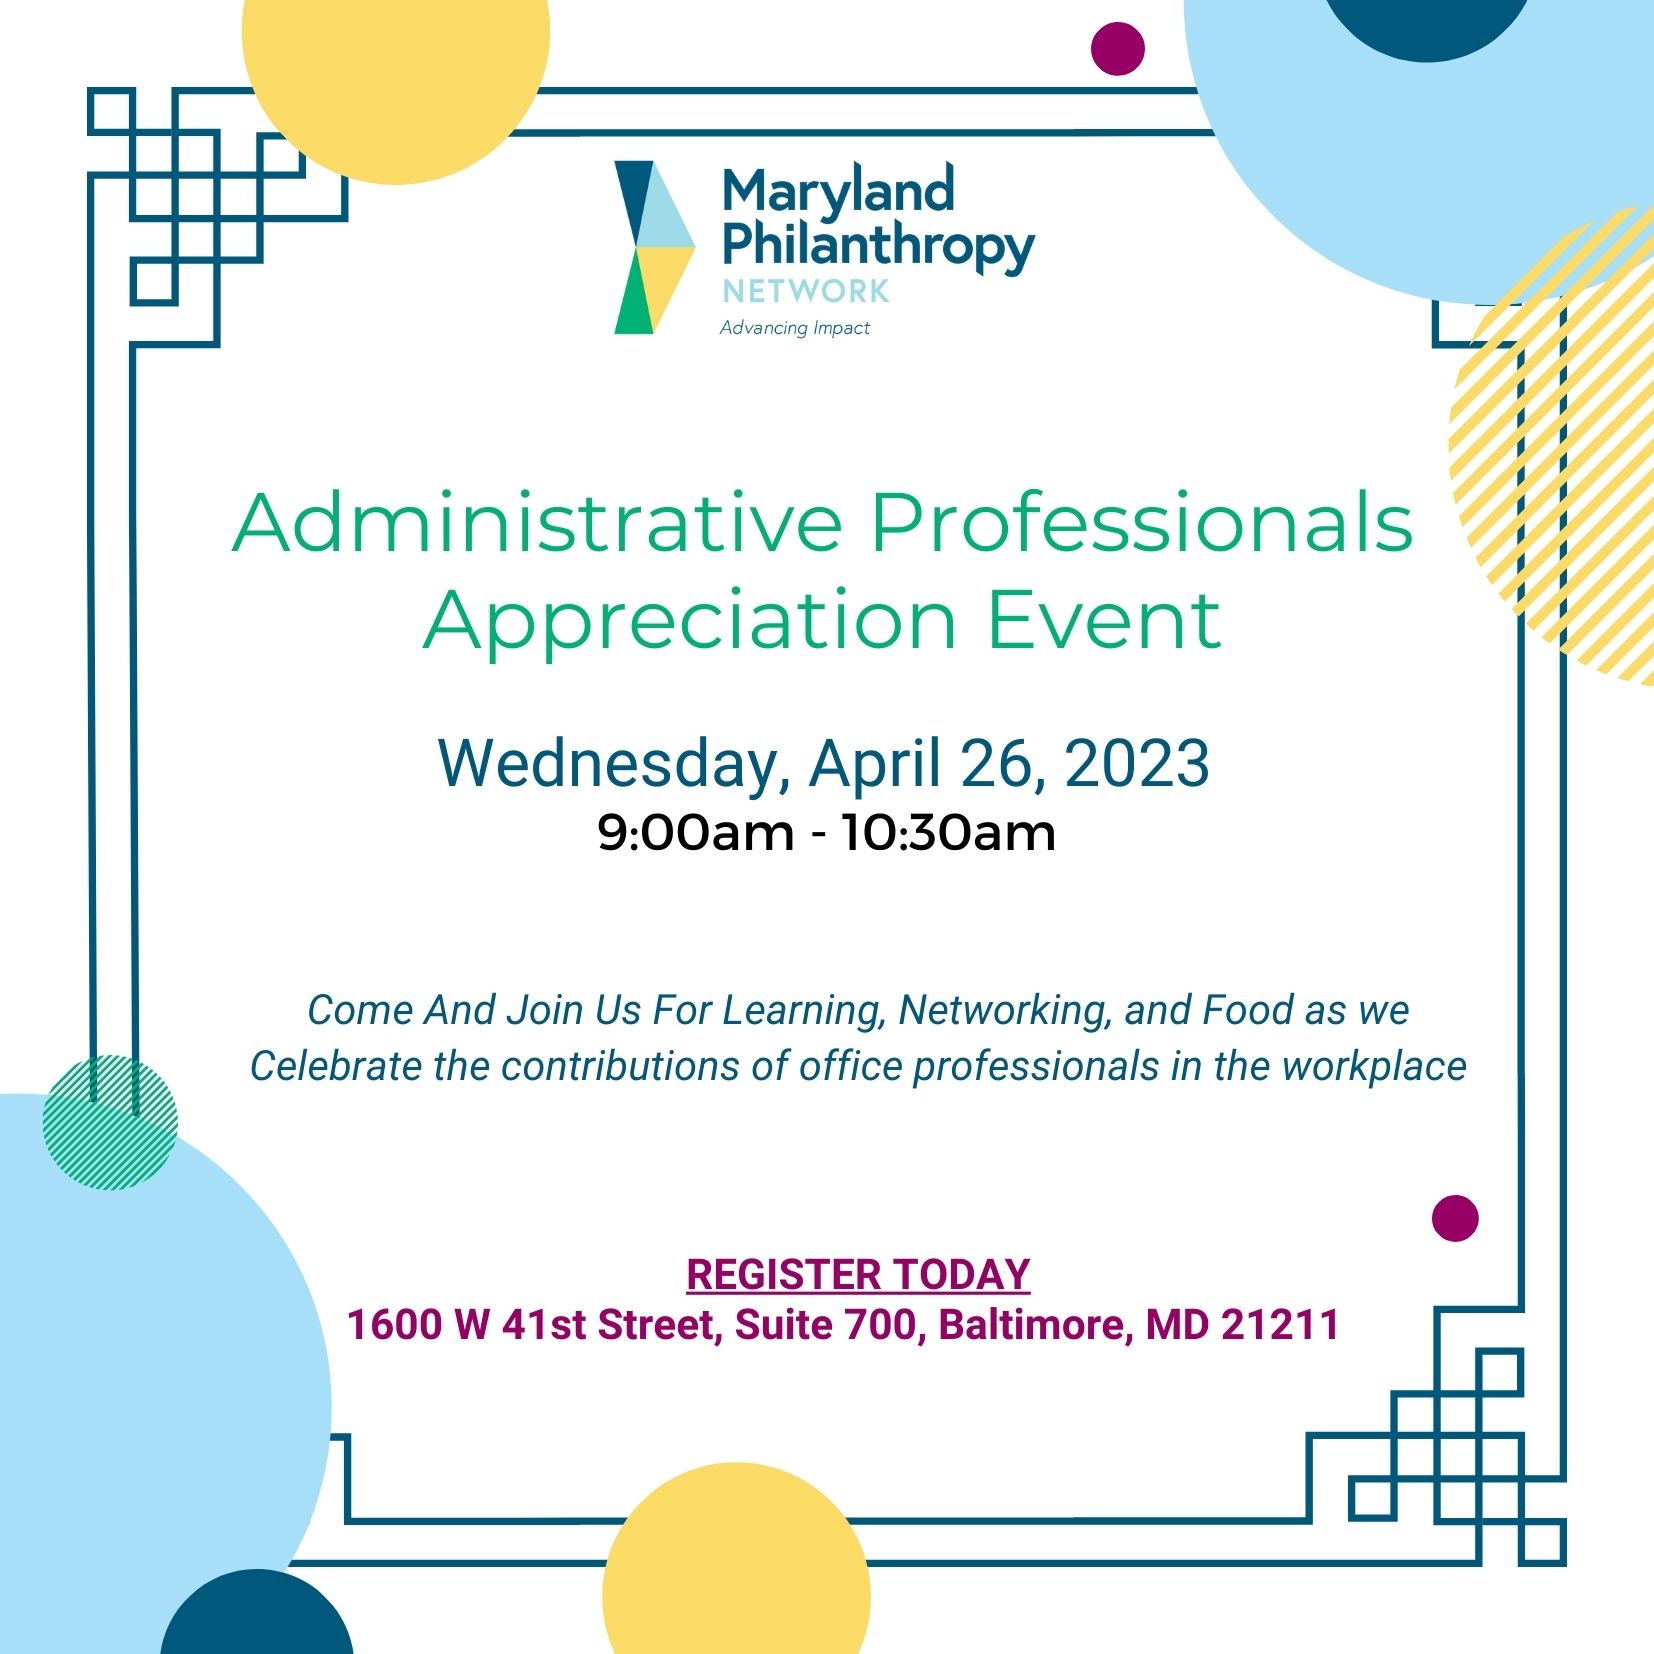 Announcement for Administrative Professionals Appreciation event on Wednesday, April 26, 2023 